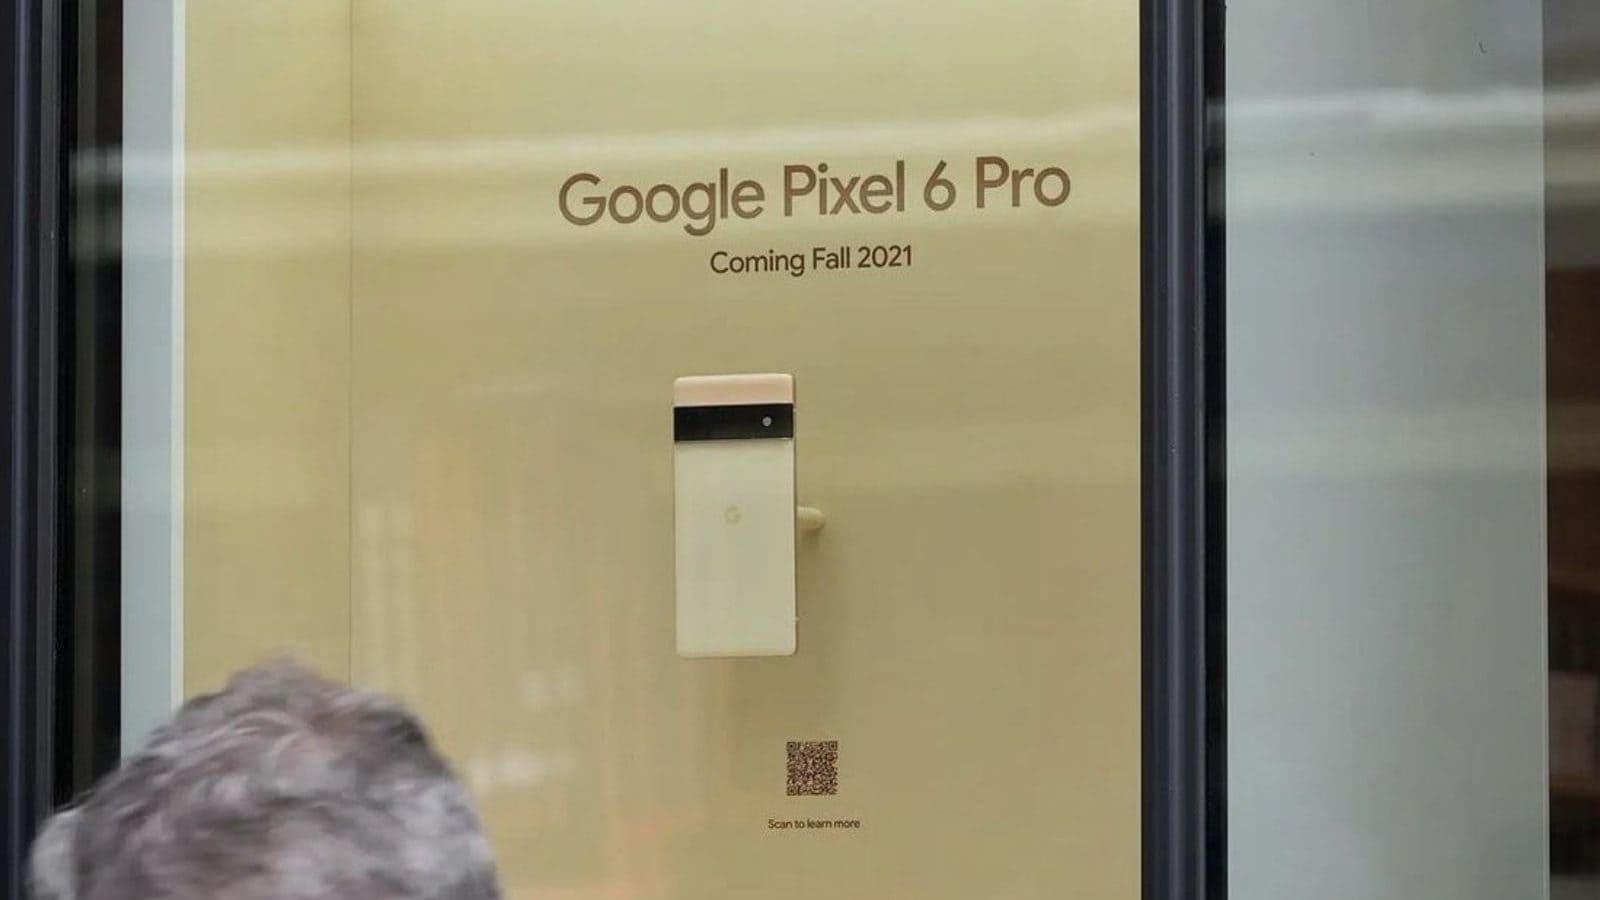 Google Pixel 6 Series Spotted on Display At Google Store in New York City